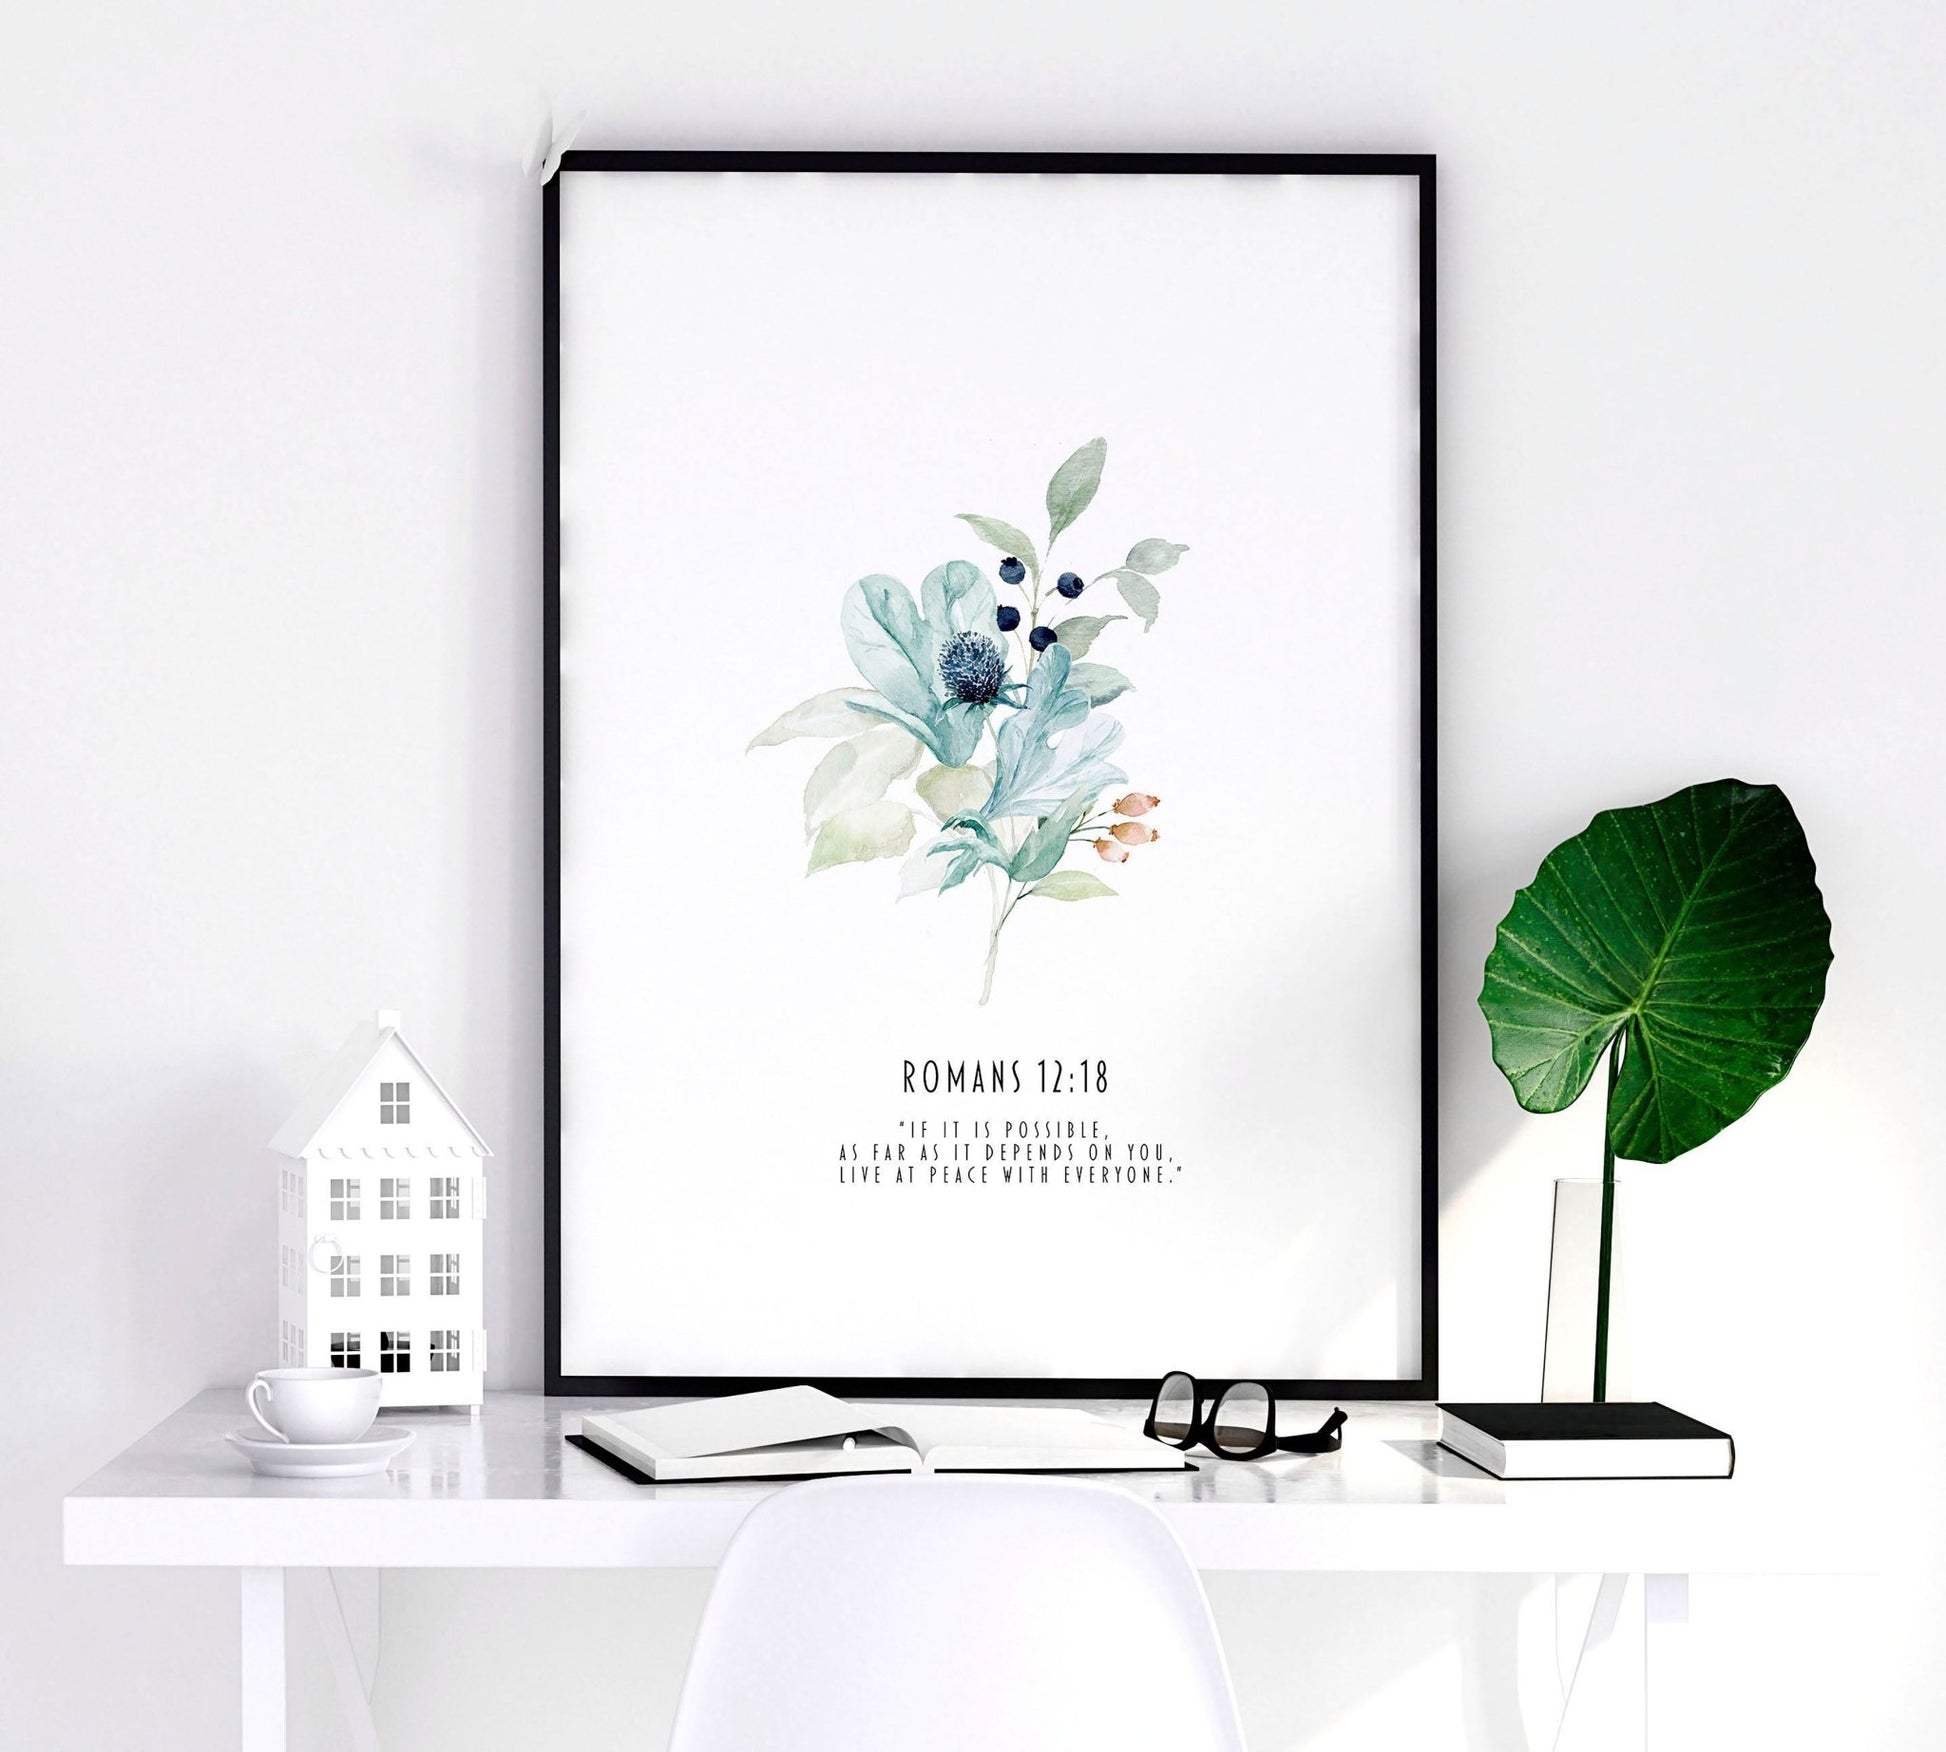 Christian religious wall art | set of 3 prints for bedroom walls